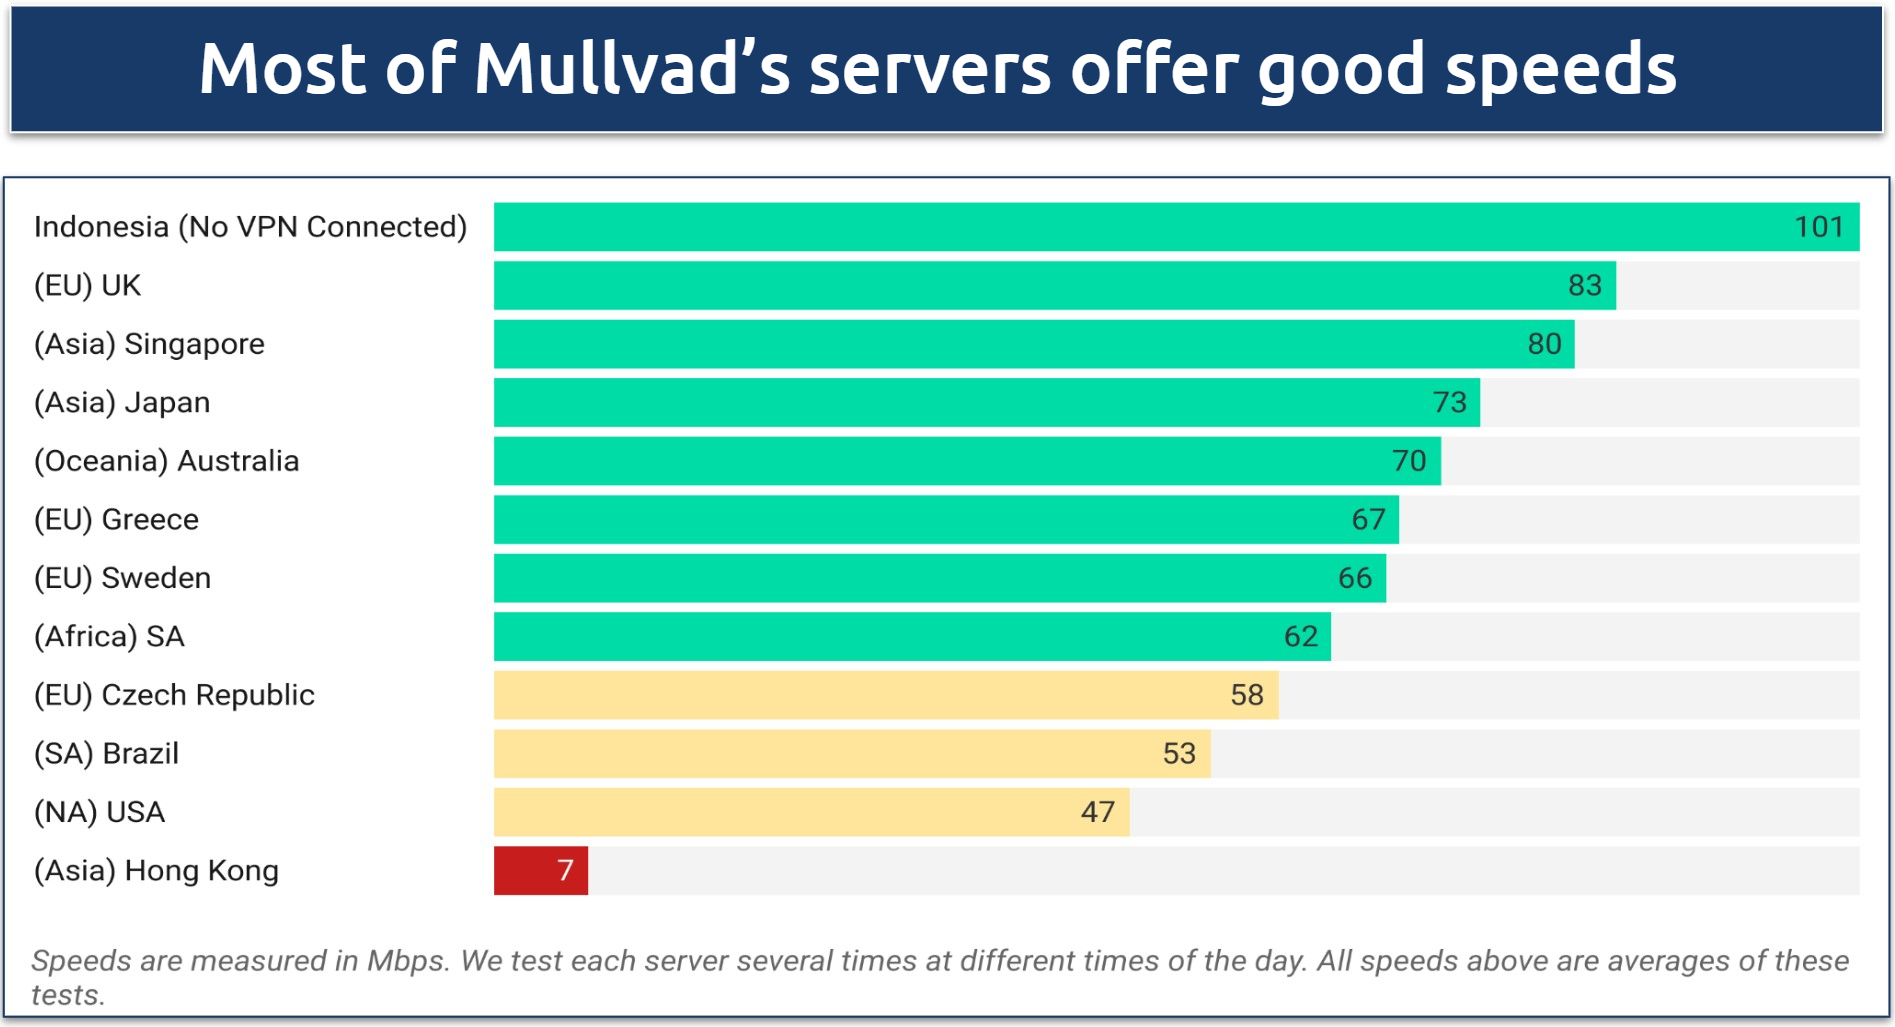 Screenshot of a chart showing speed test results for various worldwide Mullvad servers